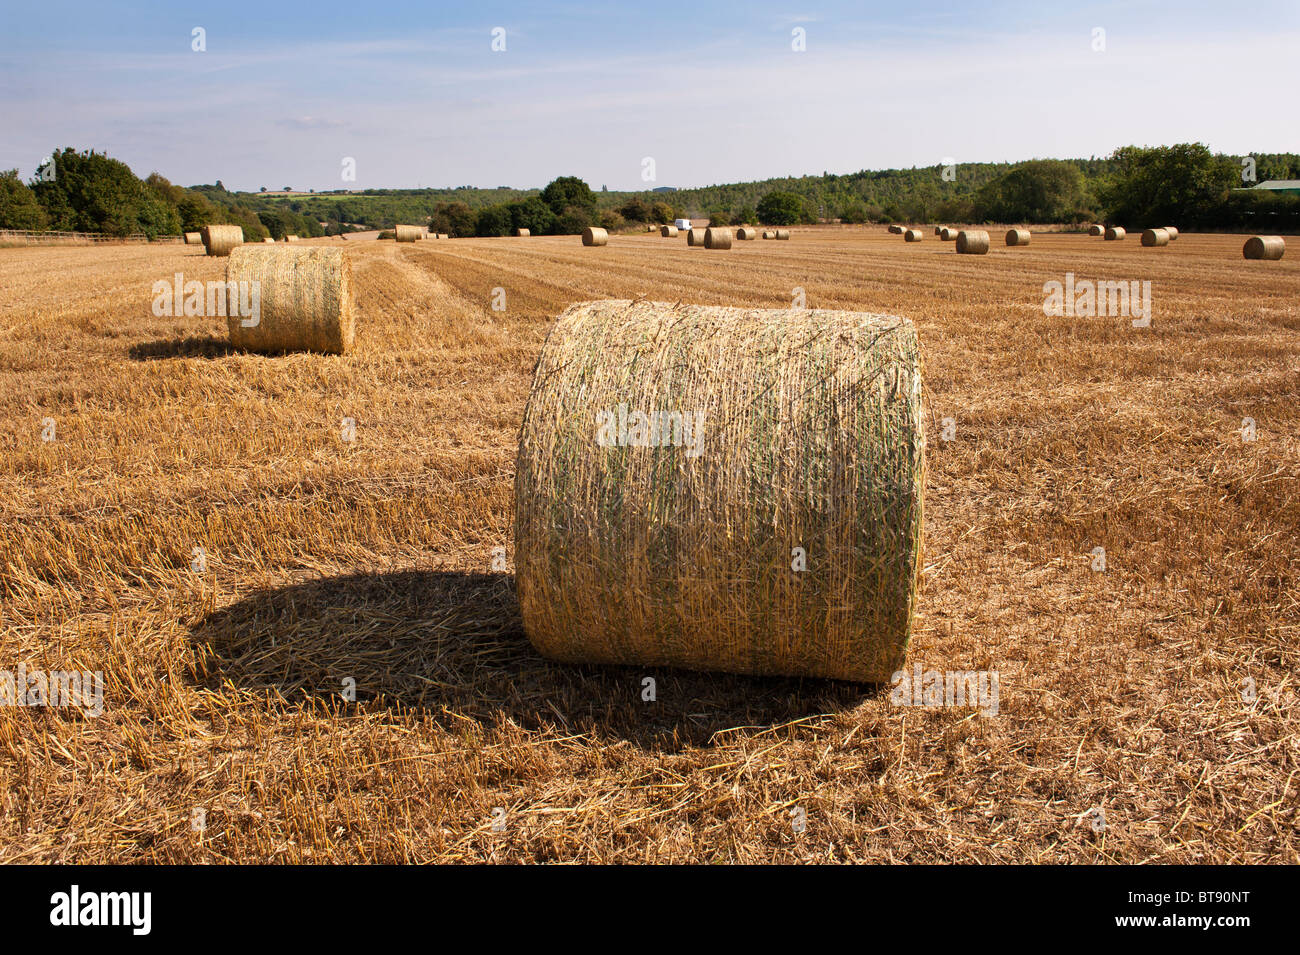 Hay bales in a field in the Peak District, Derbyshire, England. Stock Photo